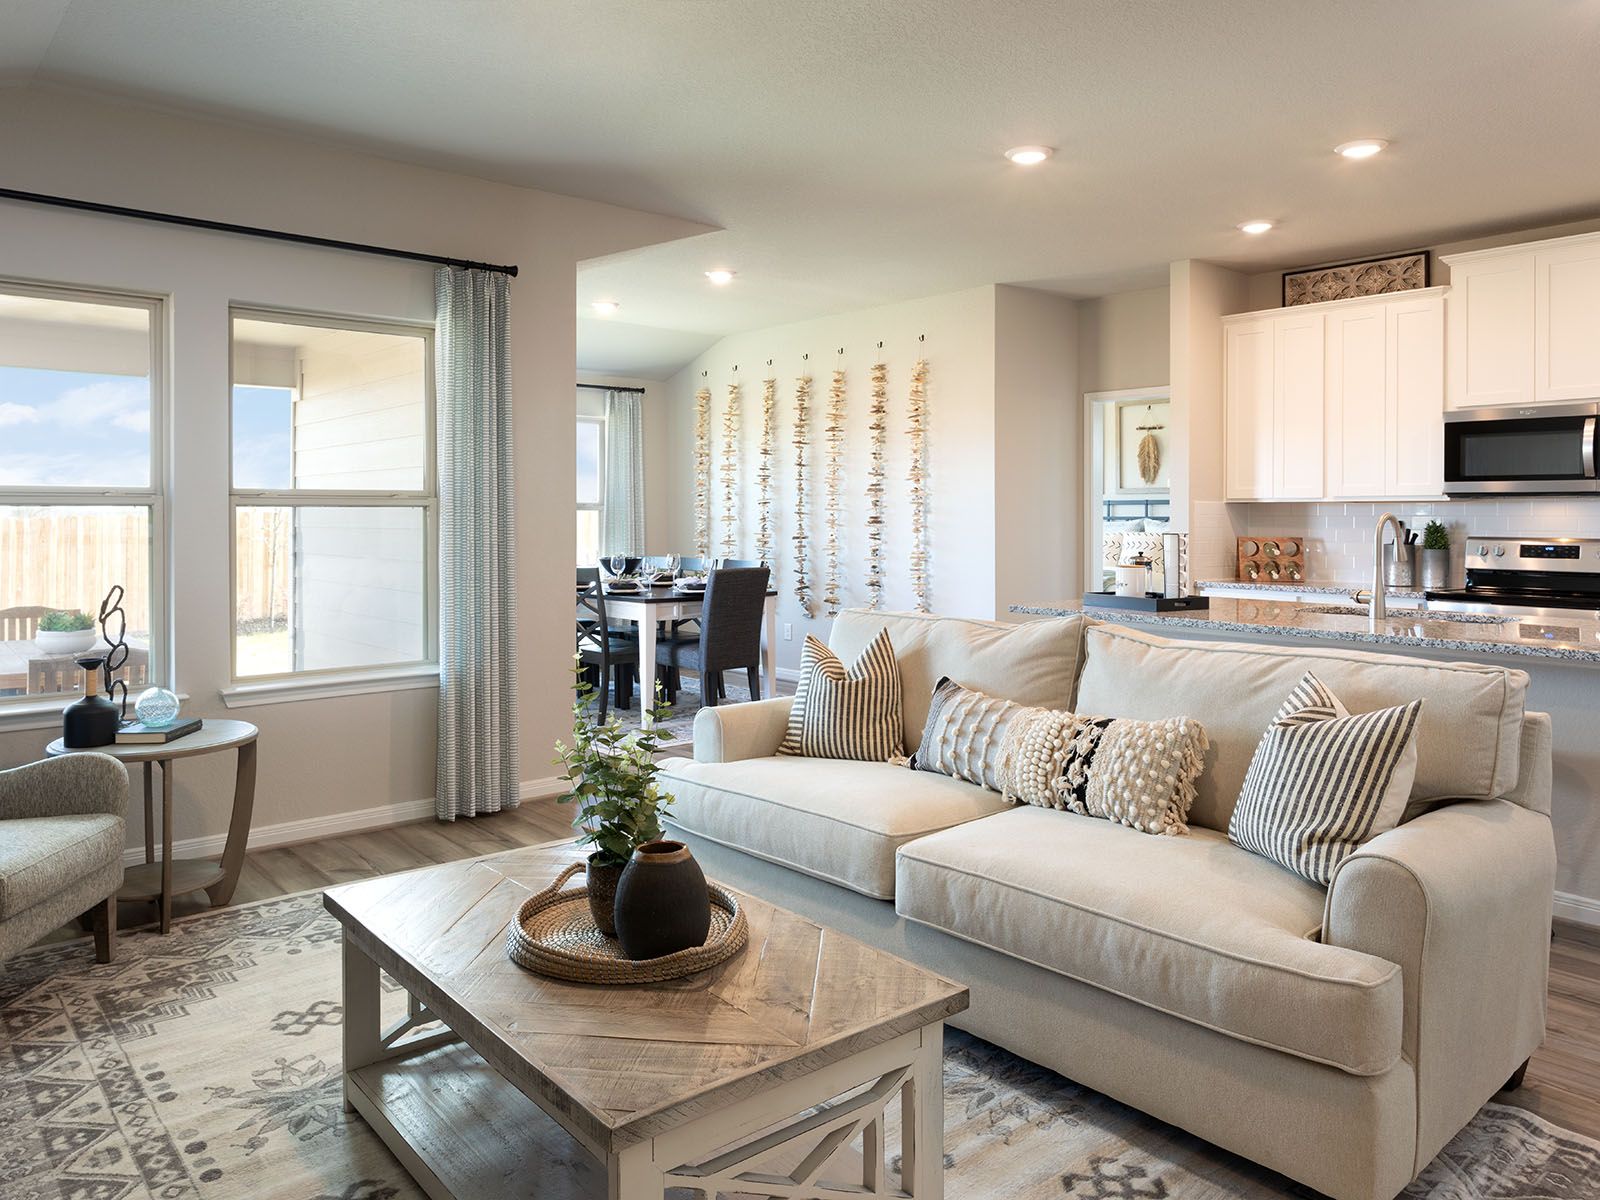 Relax in the spacious family room.